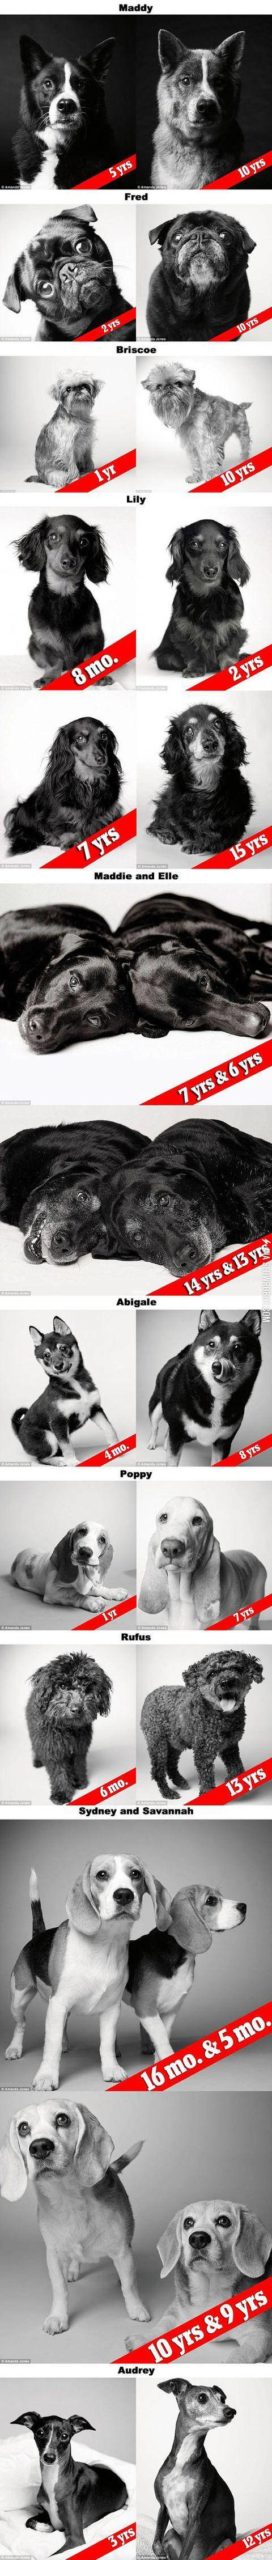 Dog+Years+portraits+of+aging+dogs+that+will+melt+your+heart